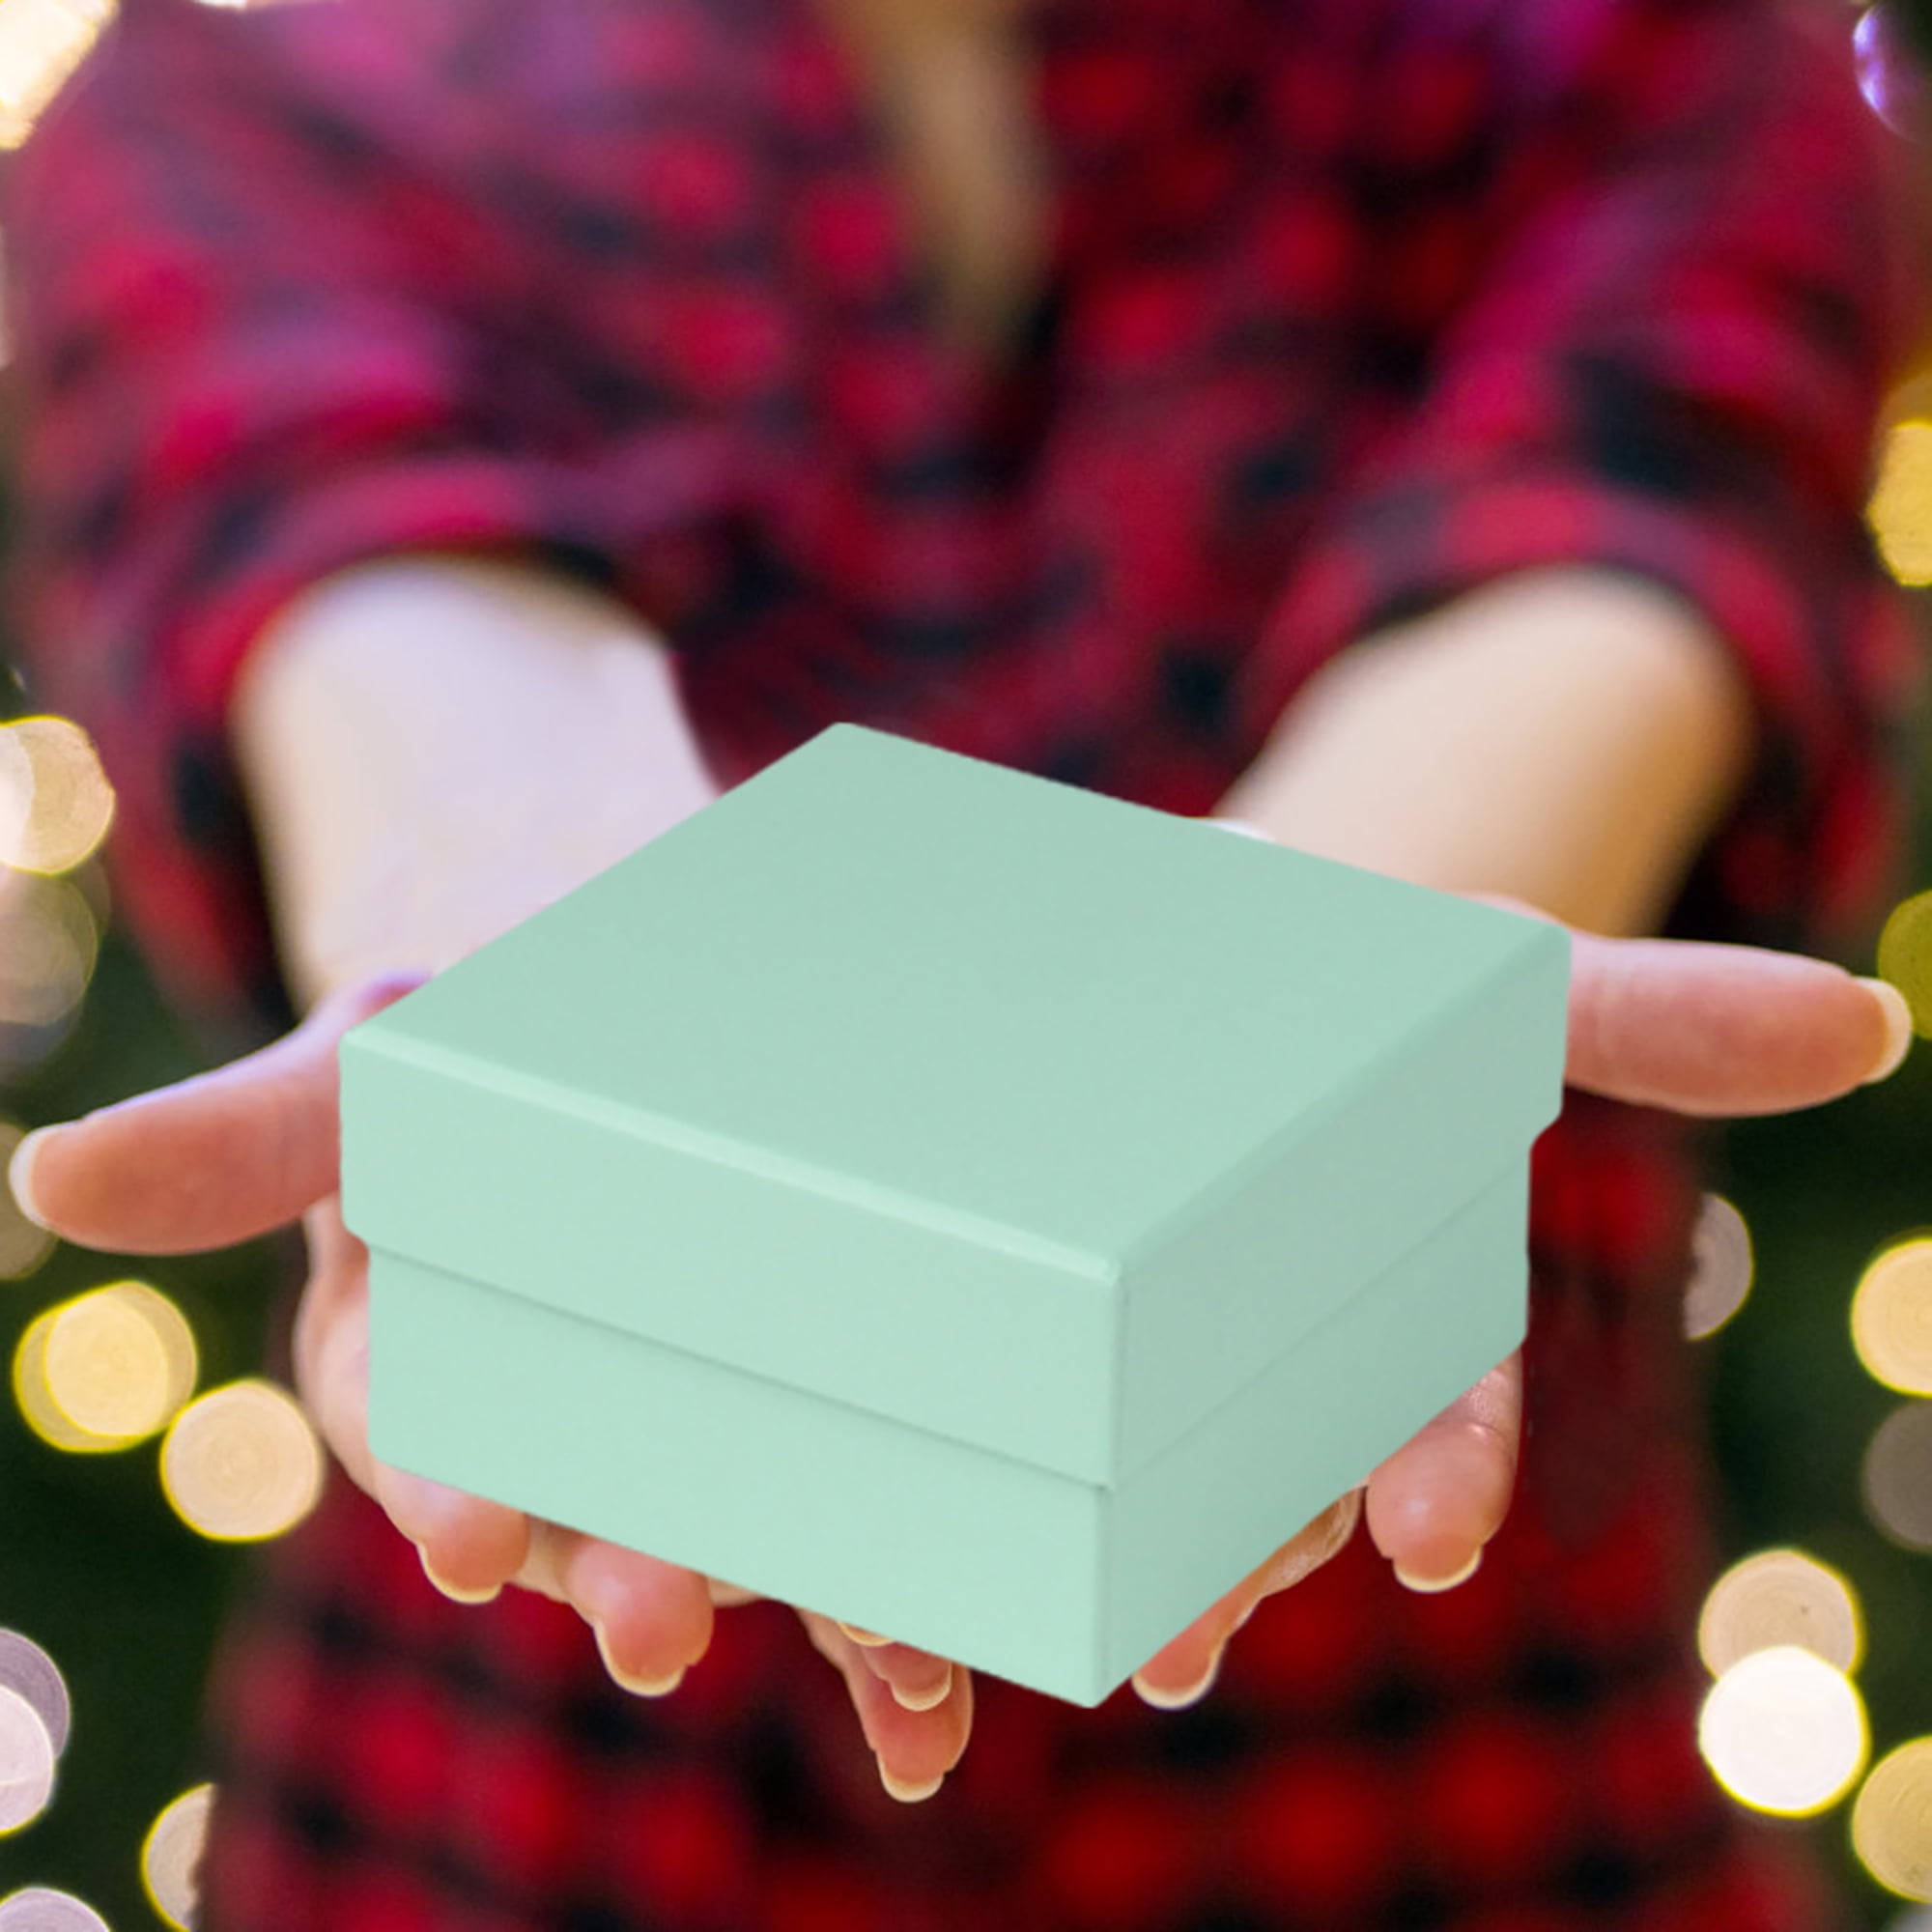 Briful Square Gift Boxes with Lids Set of 4 Teal Green Gift Box Assorted  Sizes Nesting Gift Boxes for Presents Birthday Bridesmaid Wedd